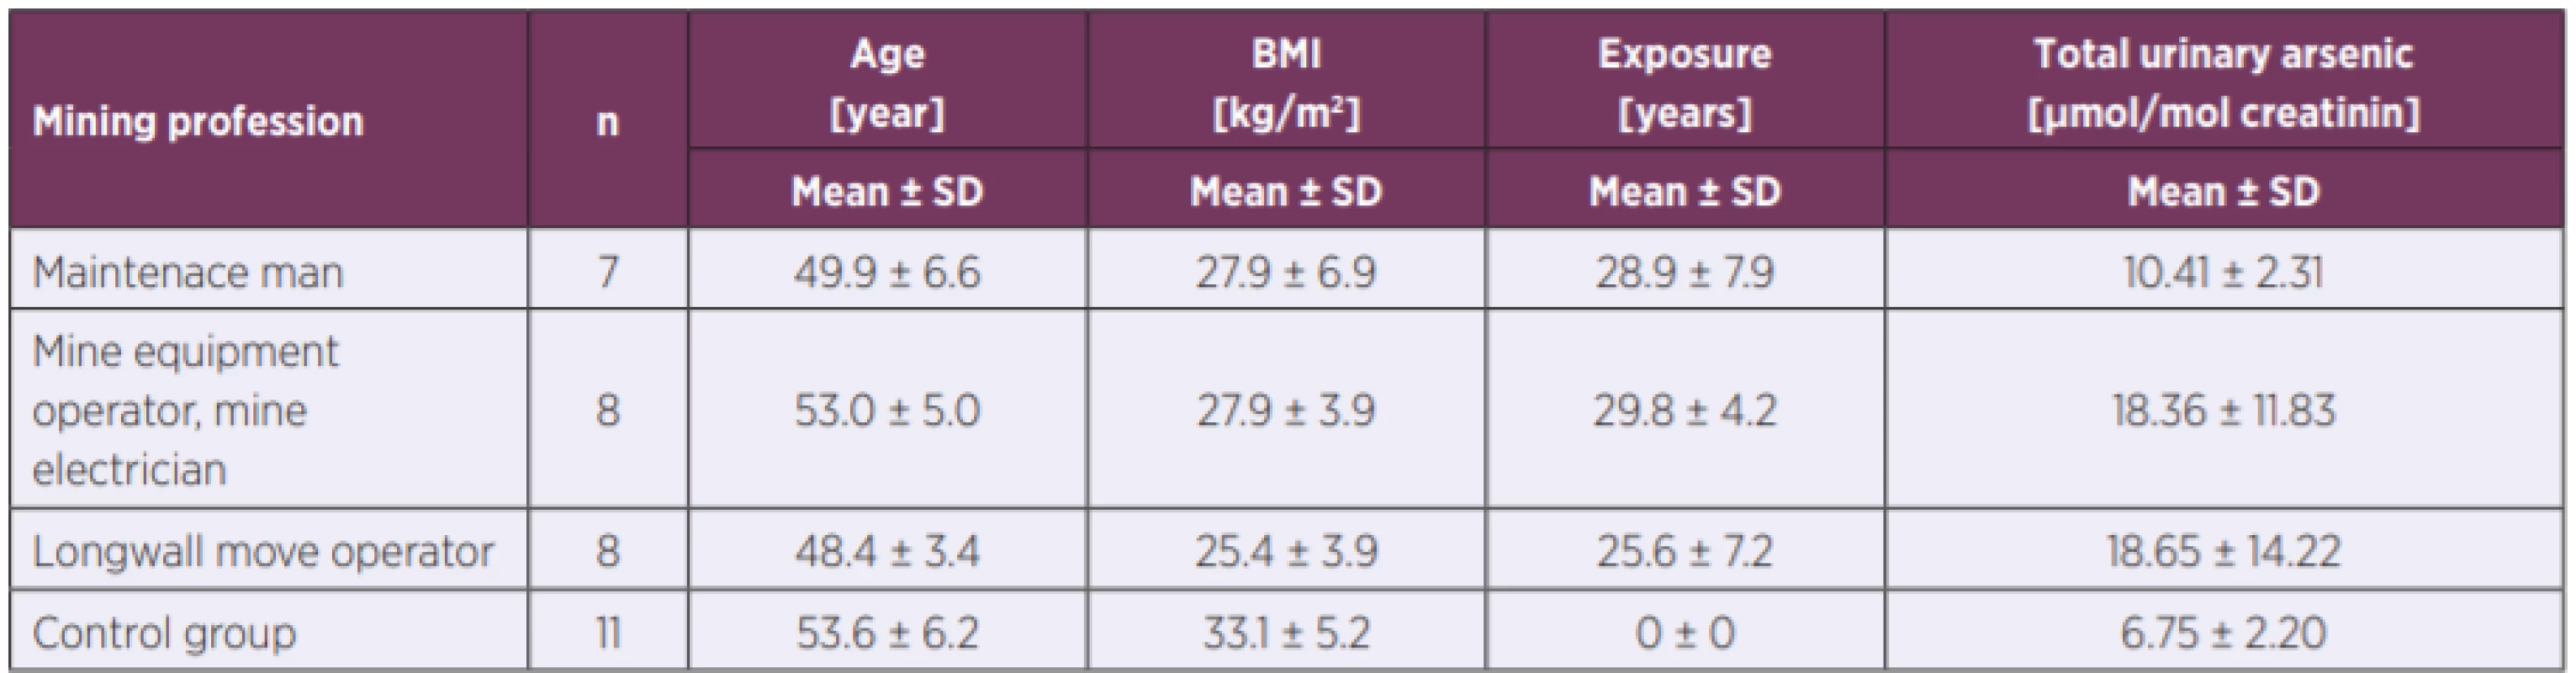 Associations of age, BMI, concentrations of total urinary arsenic in miners and control group